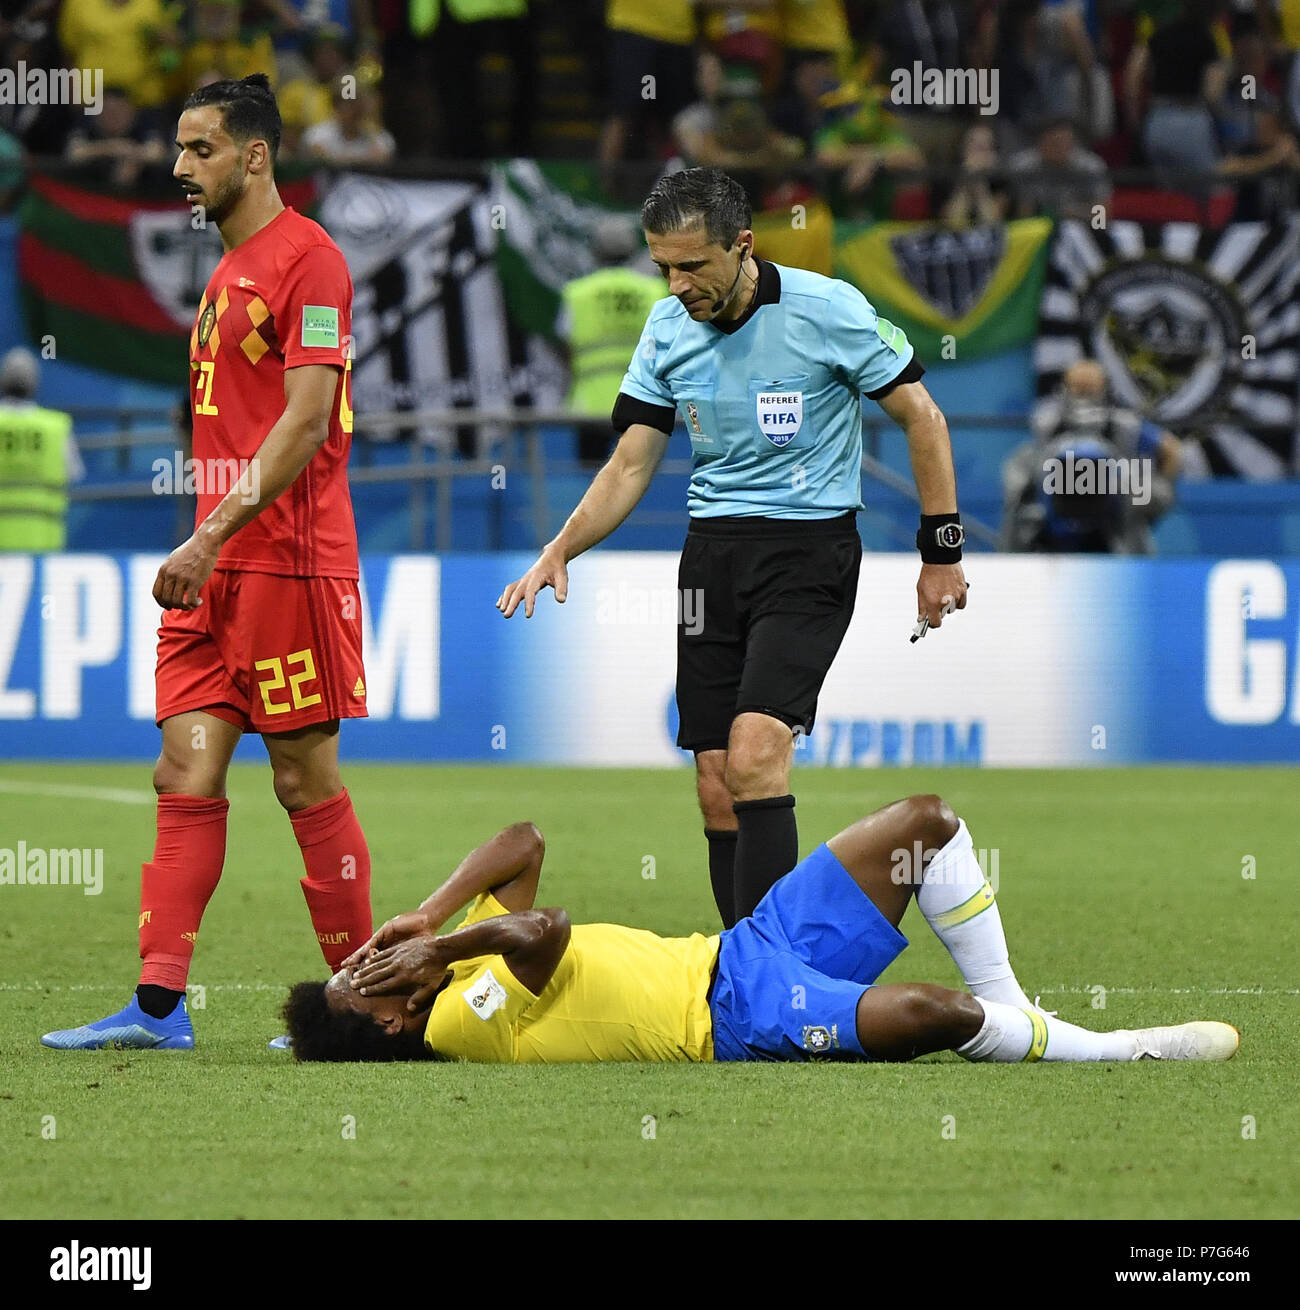 Kazan, Russia. 6th July, 2018. Willian (bottom) of Brazil lies on the pitch after his injury during the 2018 FIFA World Cup quarter-final match between Brazil and Belgium in Kazan, Russia, July 6, 2018. Credit: He Canling/Xinhua/Alamy Live News Stock Photo